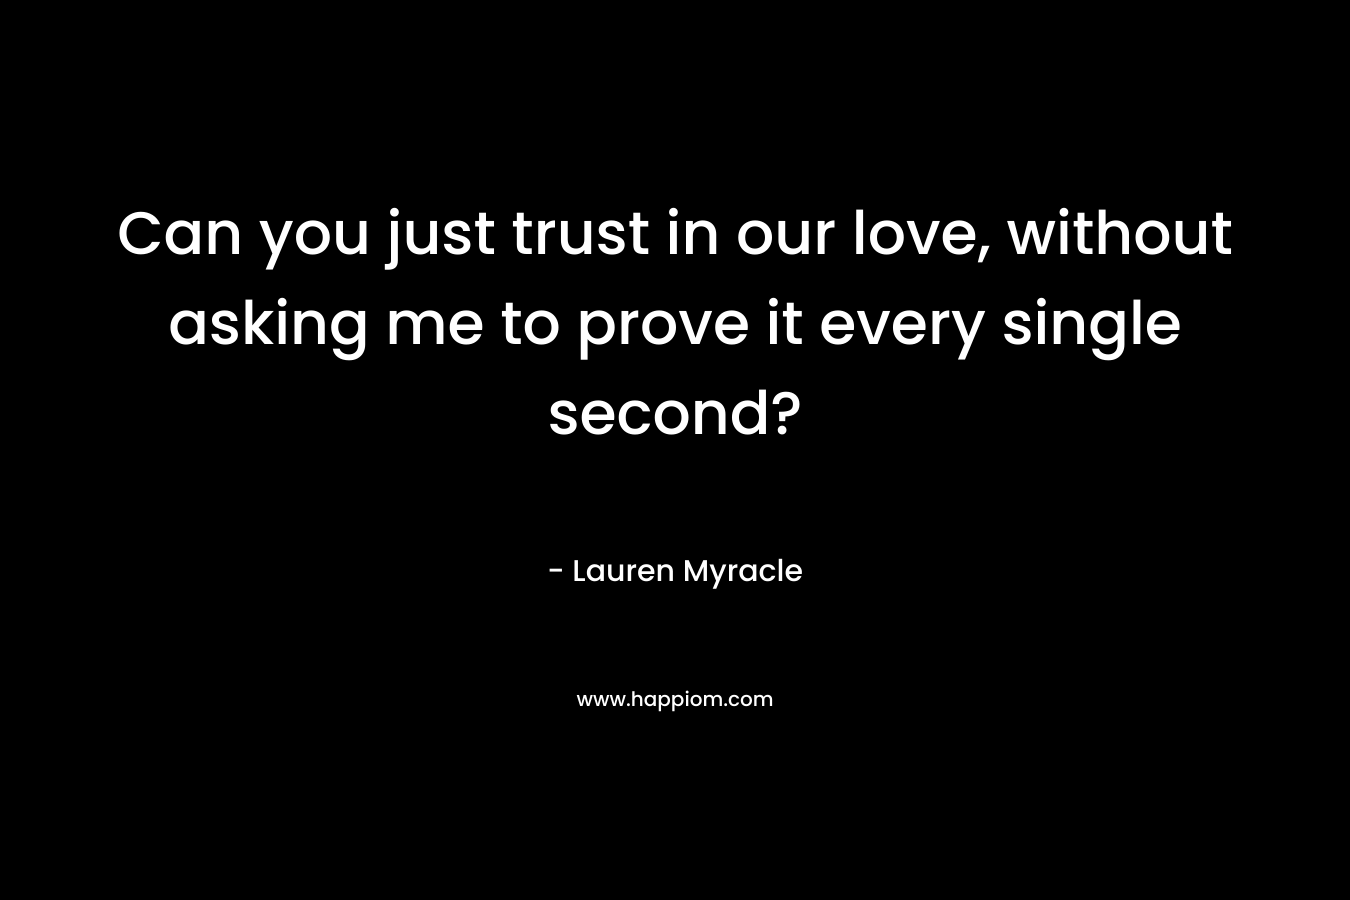 Can you just trust in our love, without asking me to prove it every single second? – Lauren Myracle